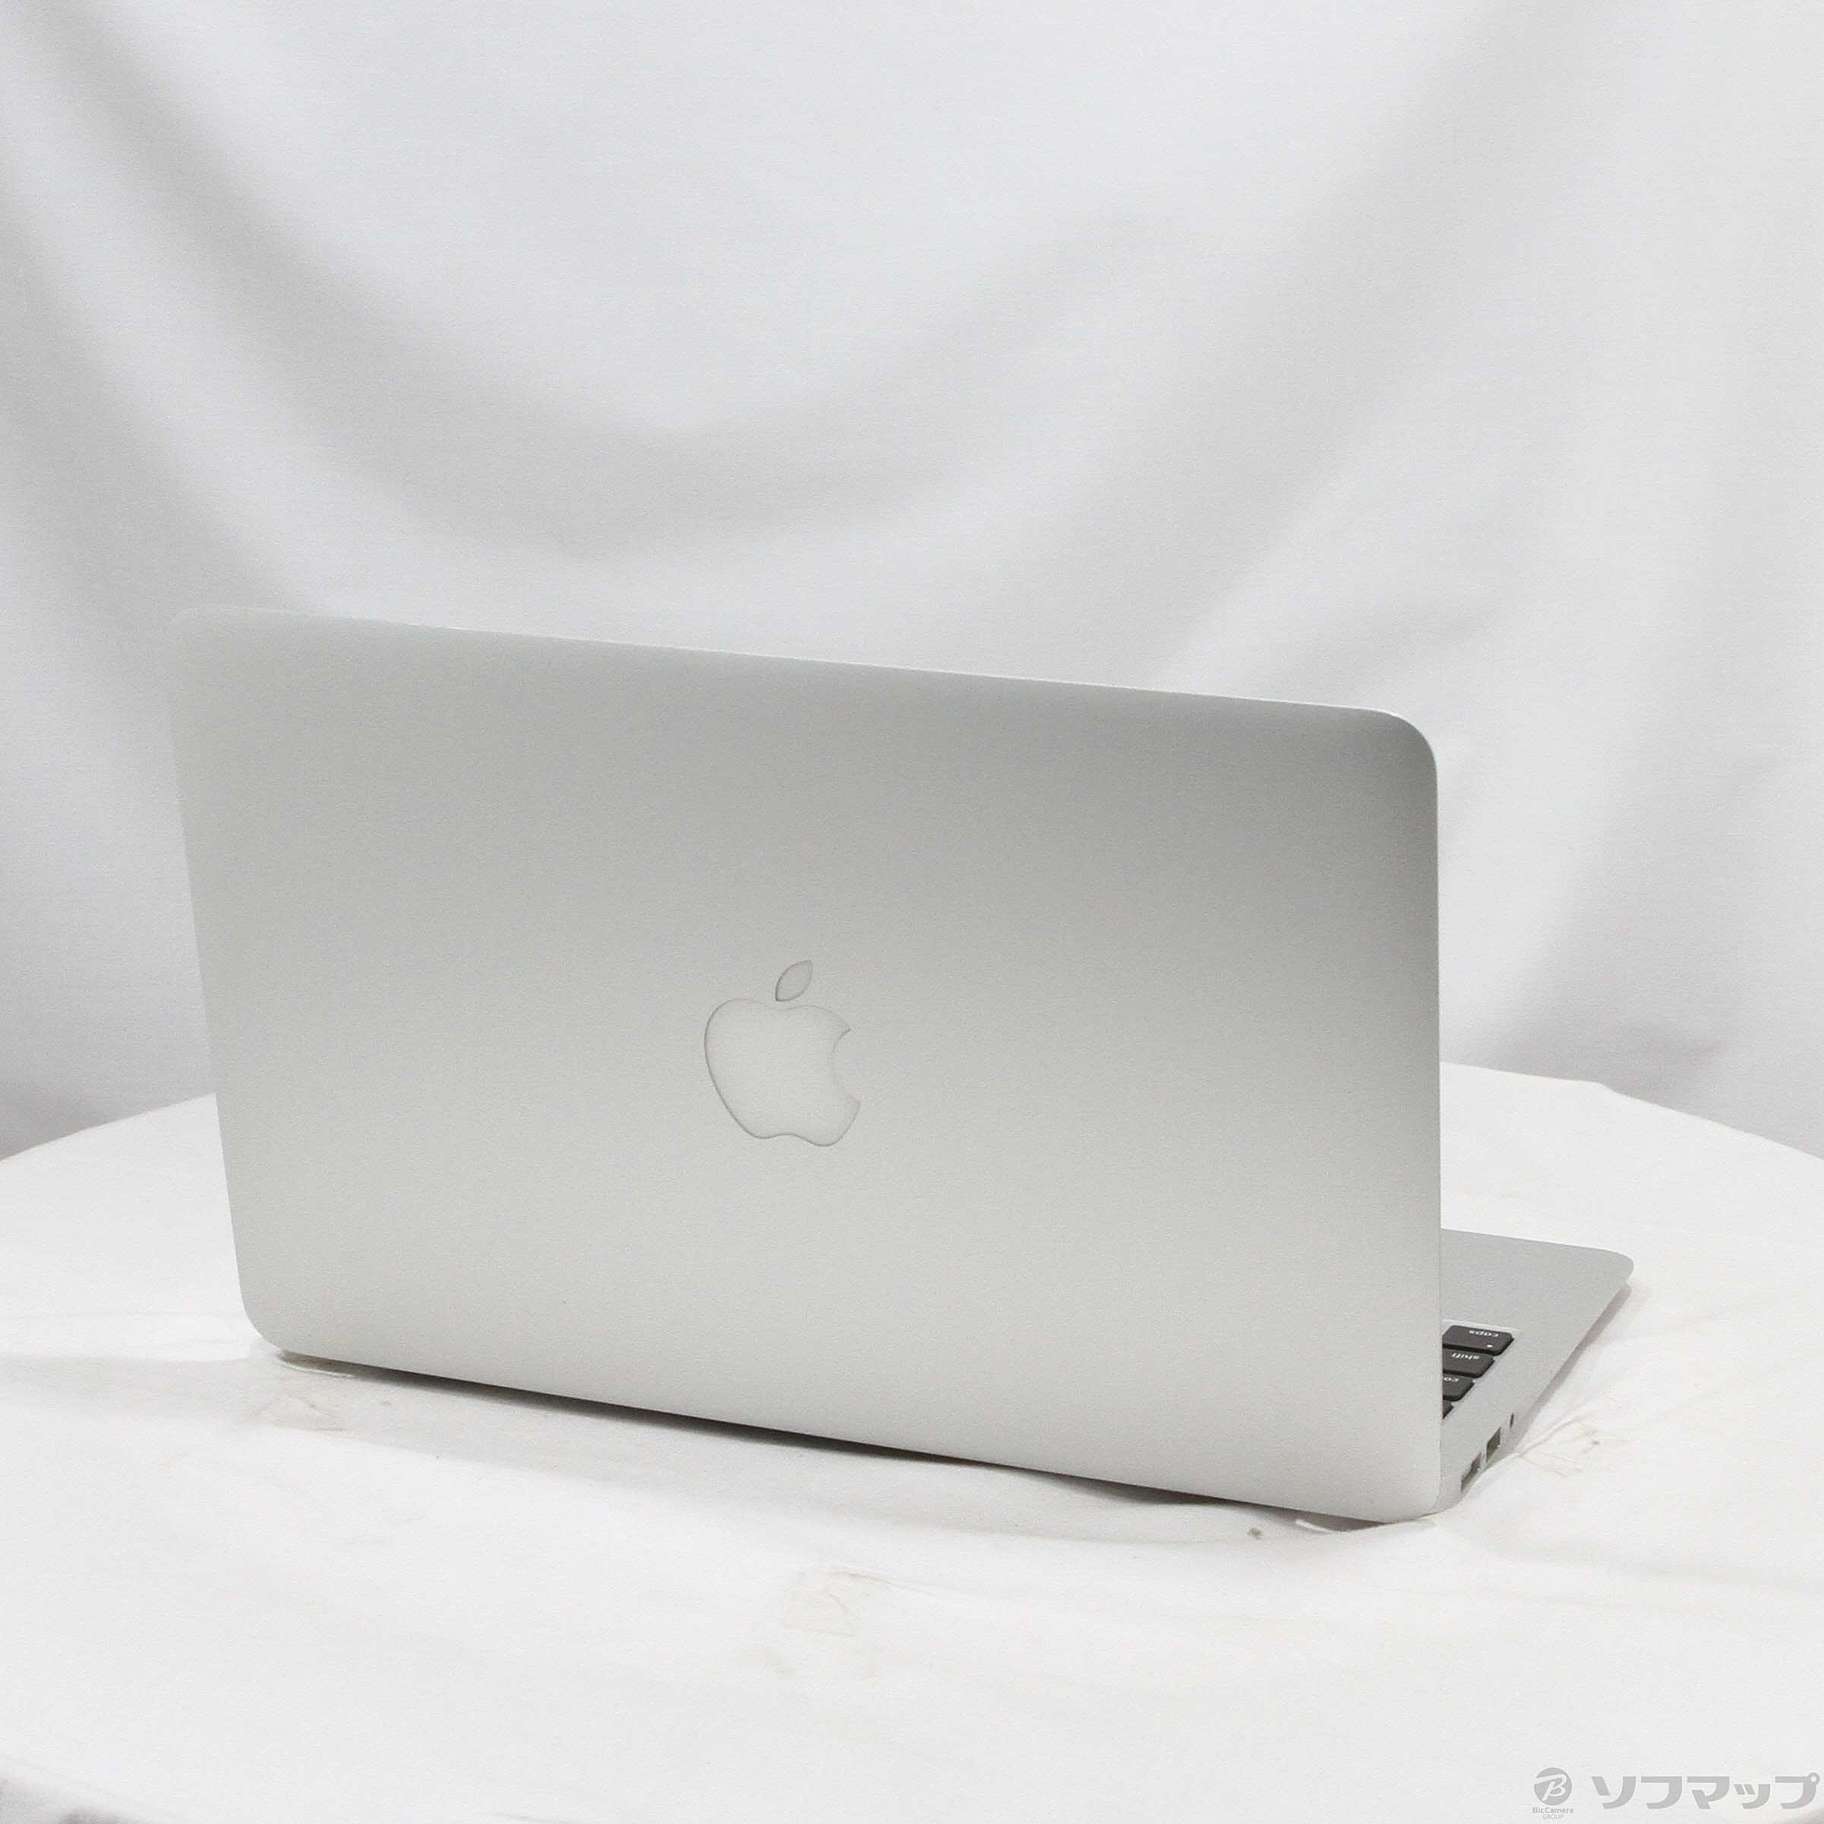 DVDmacbook air 11.6-inch early 2014  週末限定